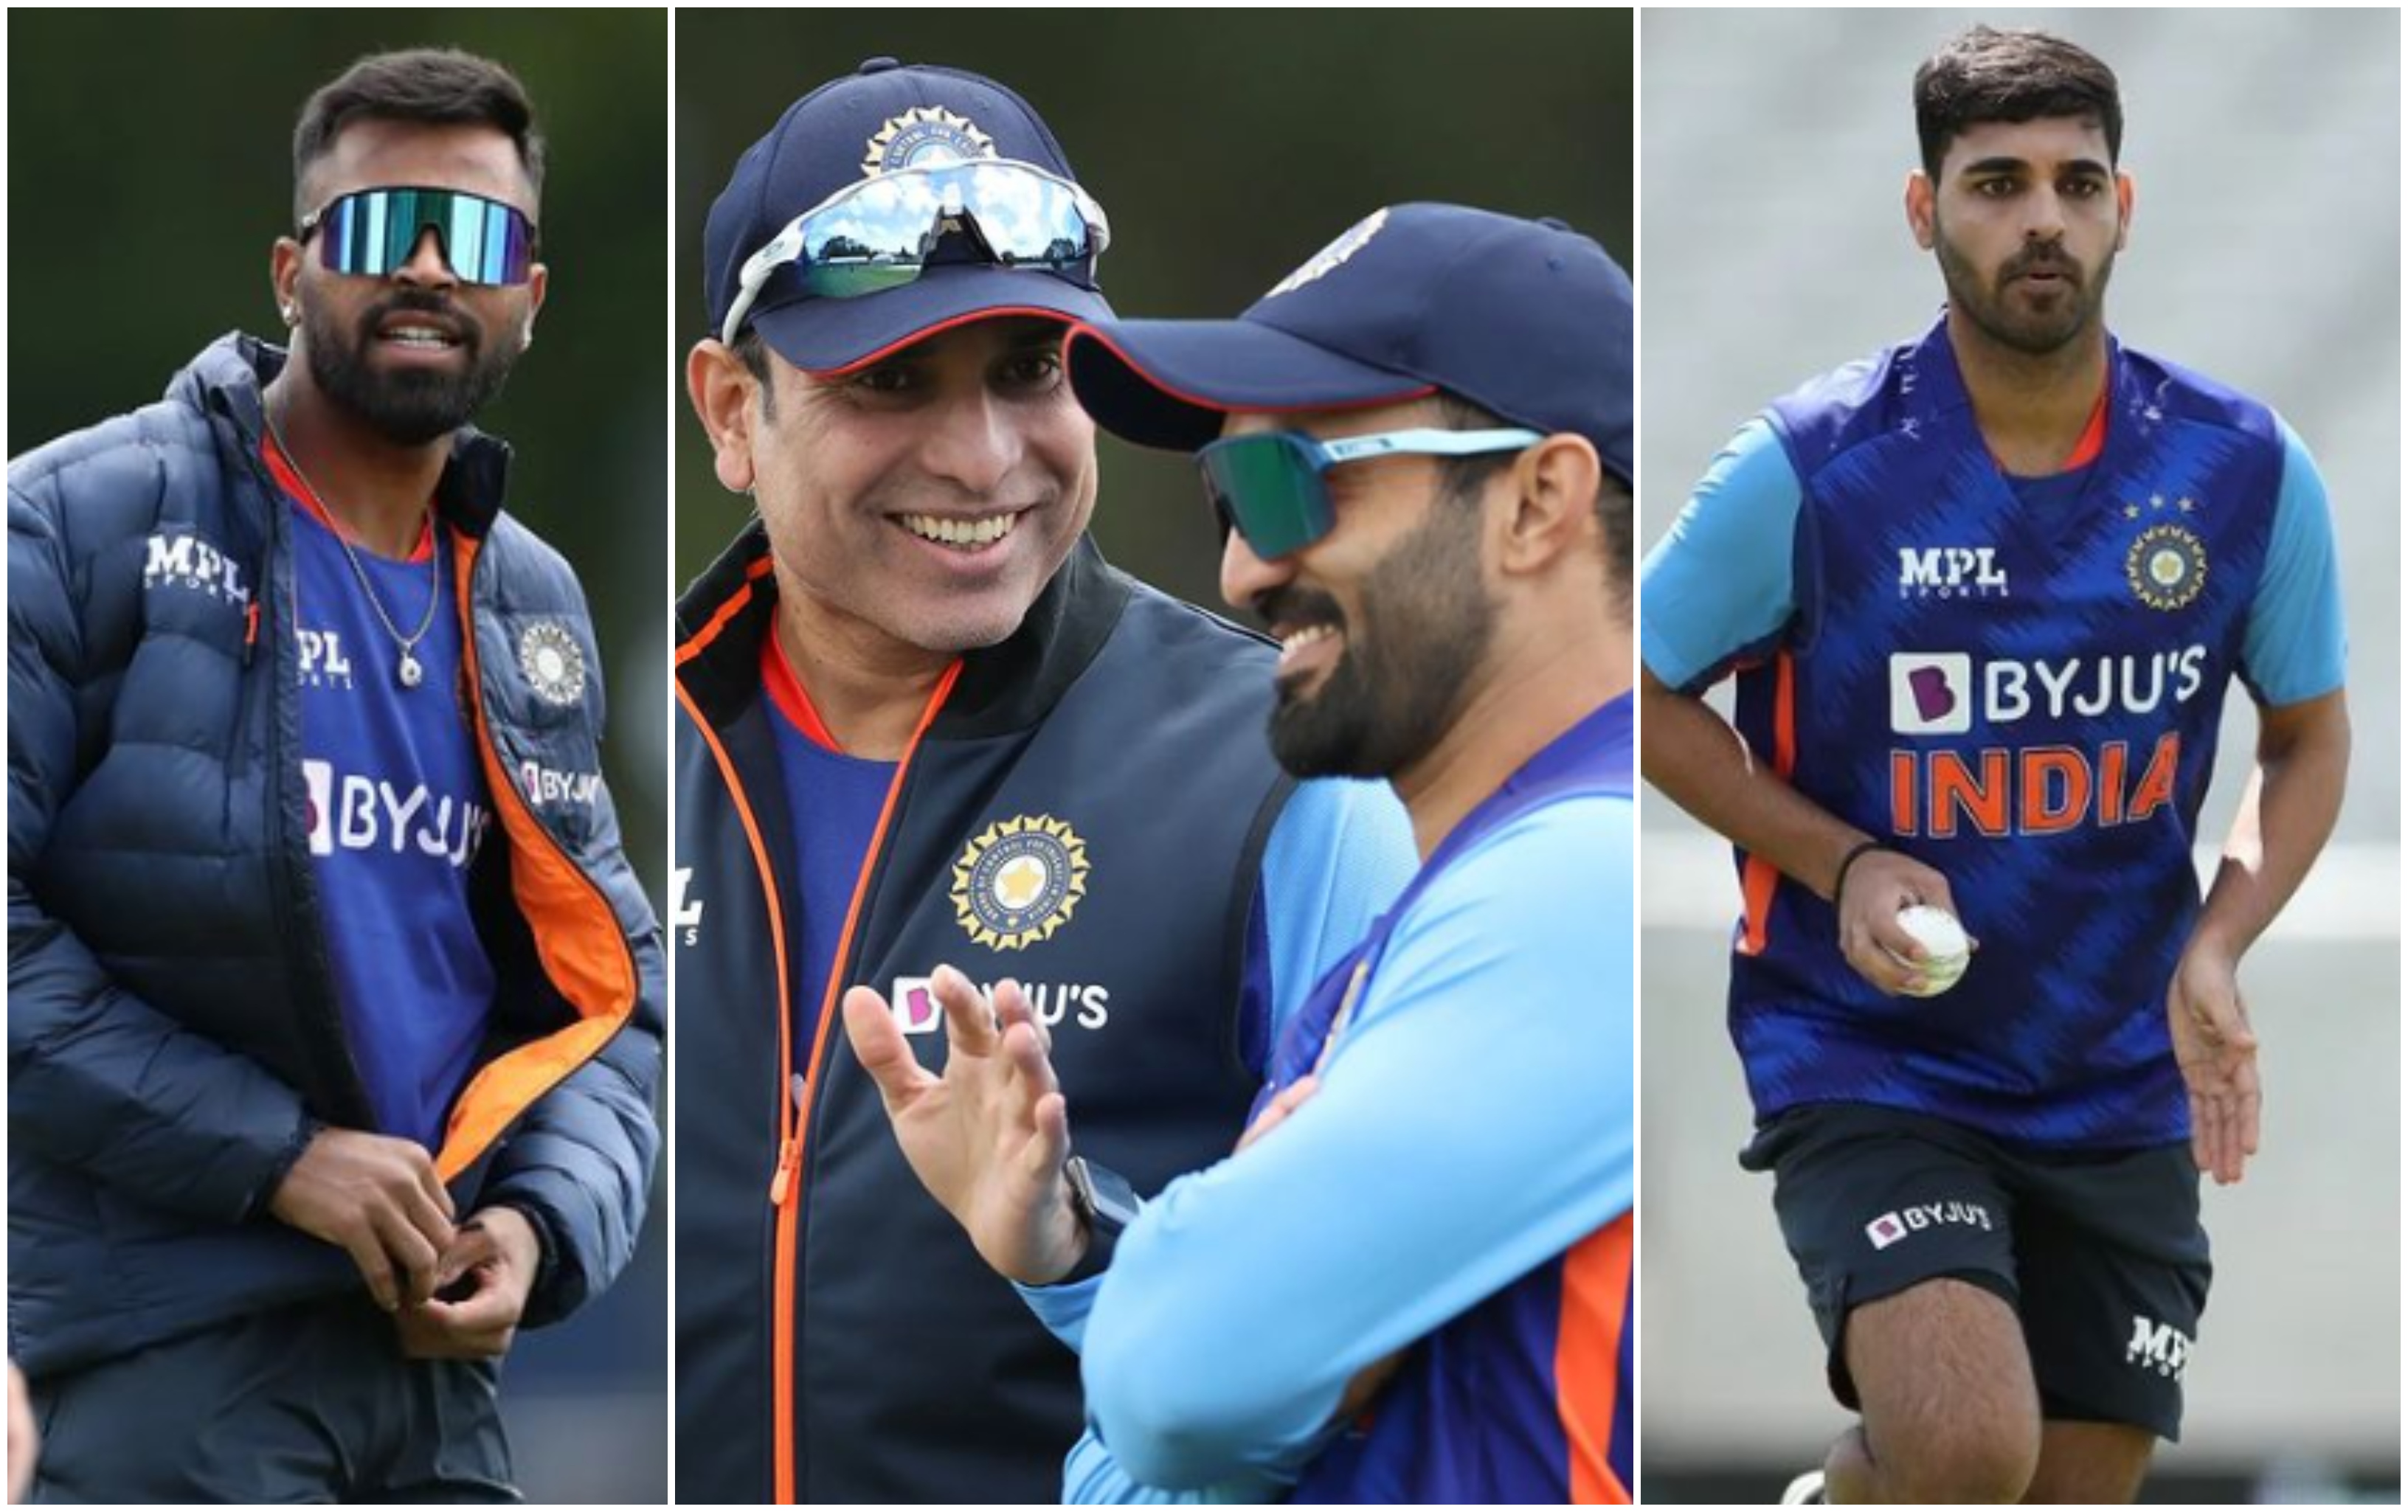 Pictures from Team India's training session | BCCI/Instagram